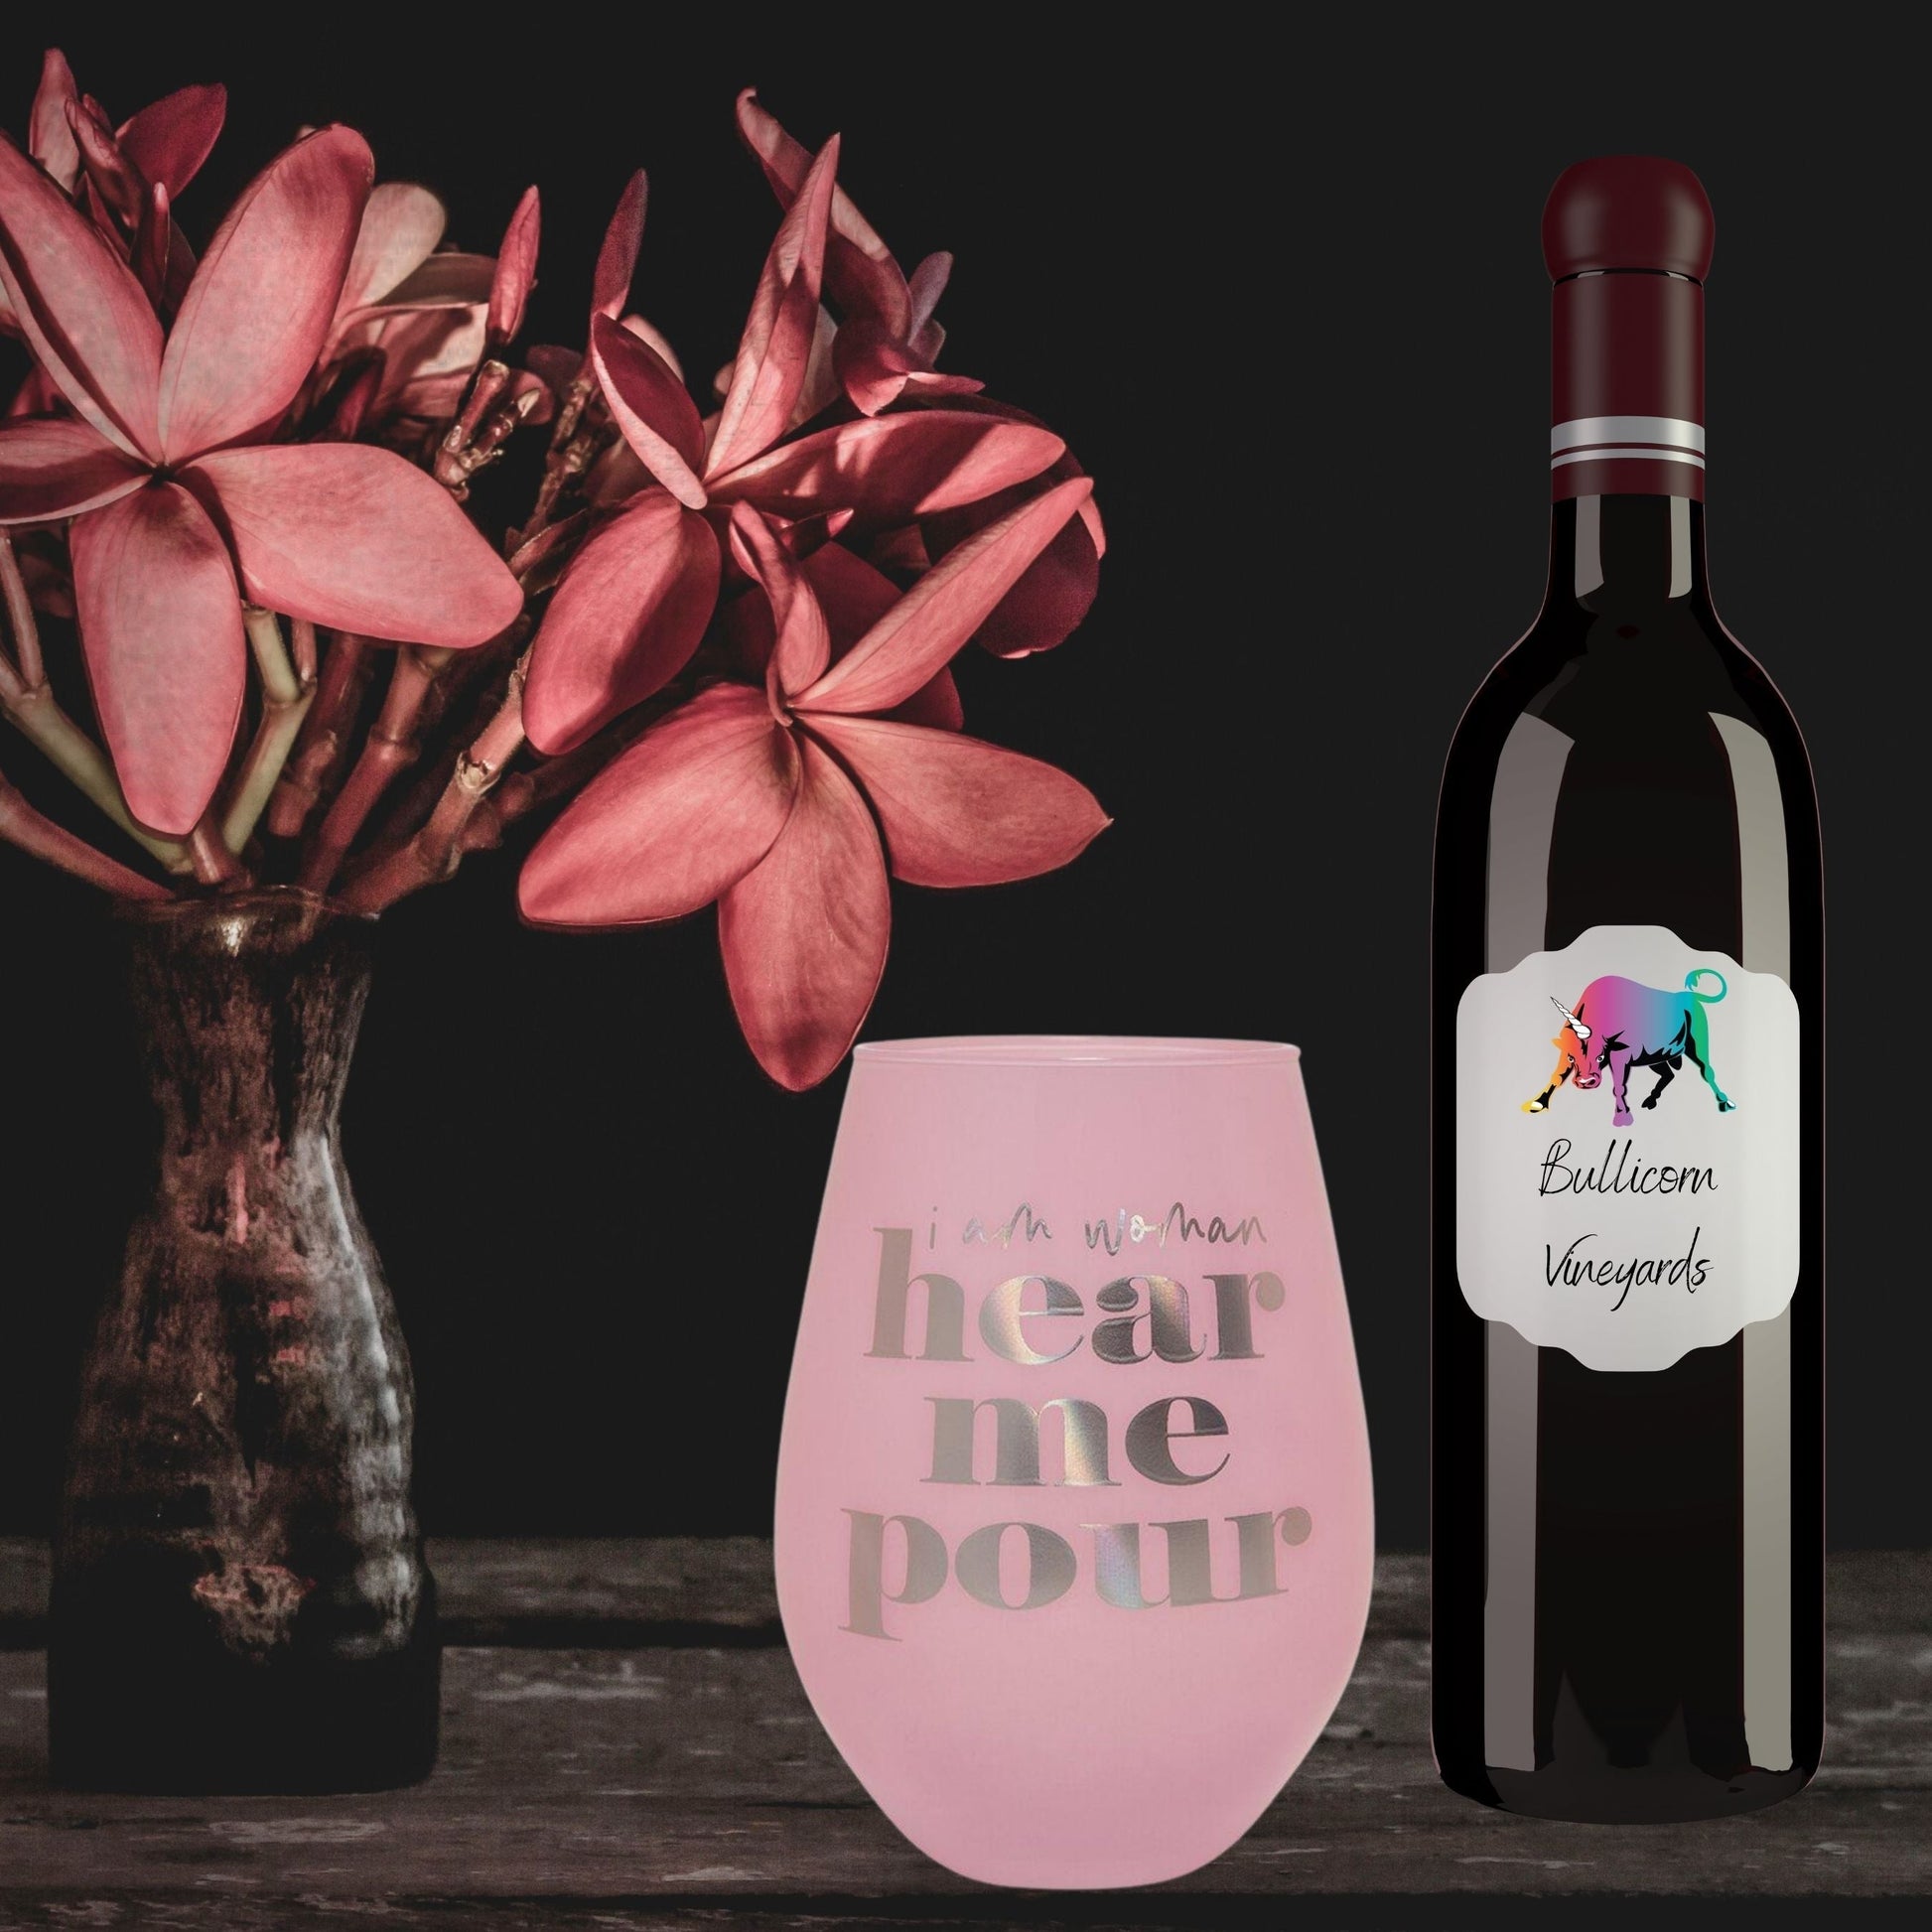 I Am Woman - Hear Me Pour Jumbo Stemless Wine Glass in Purple | 30 Oz. | Holds an Entire Bottle of Wine